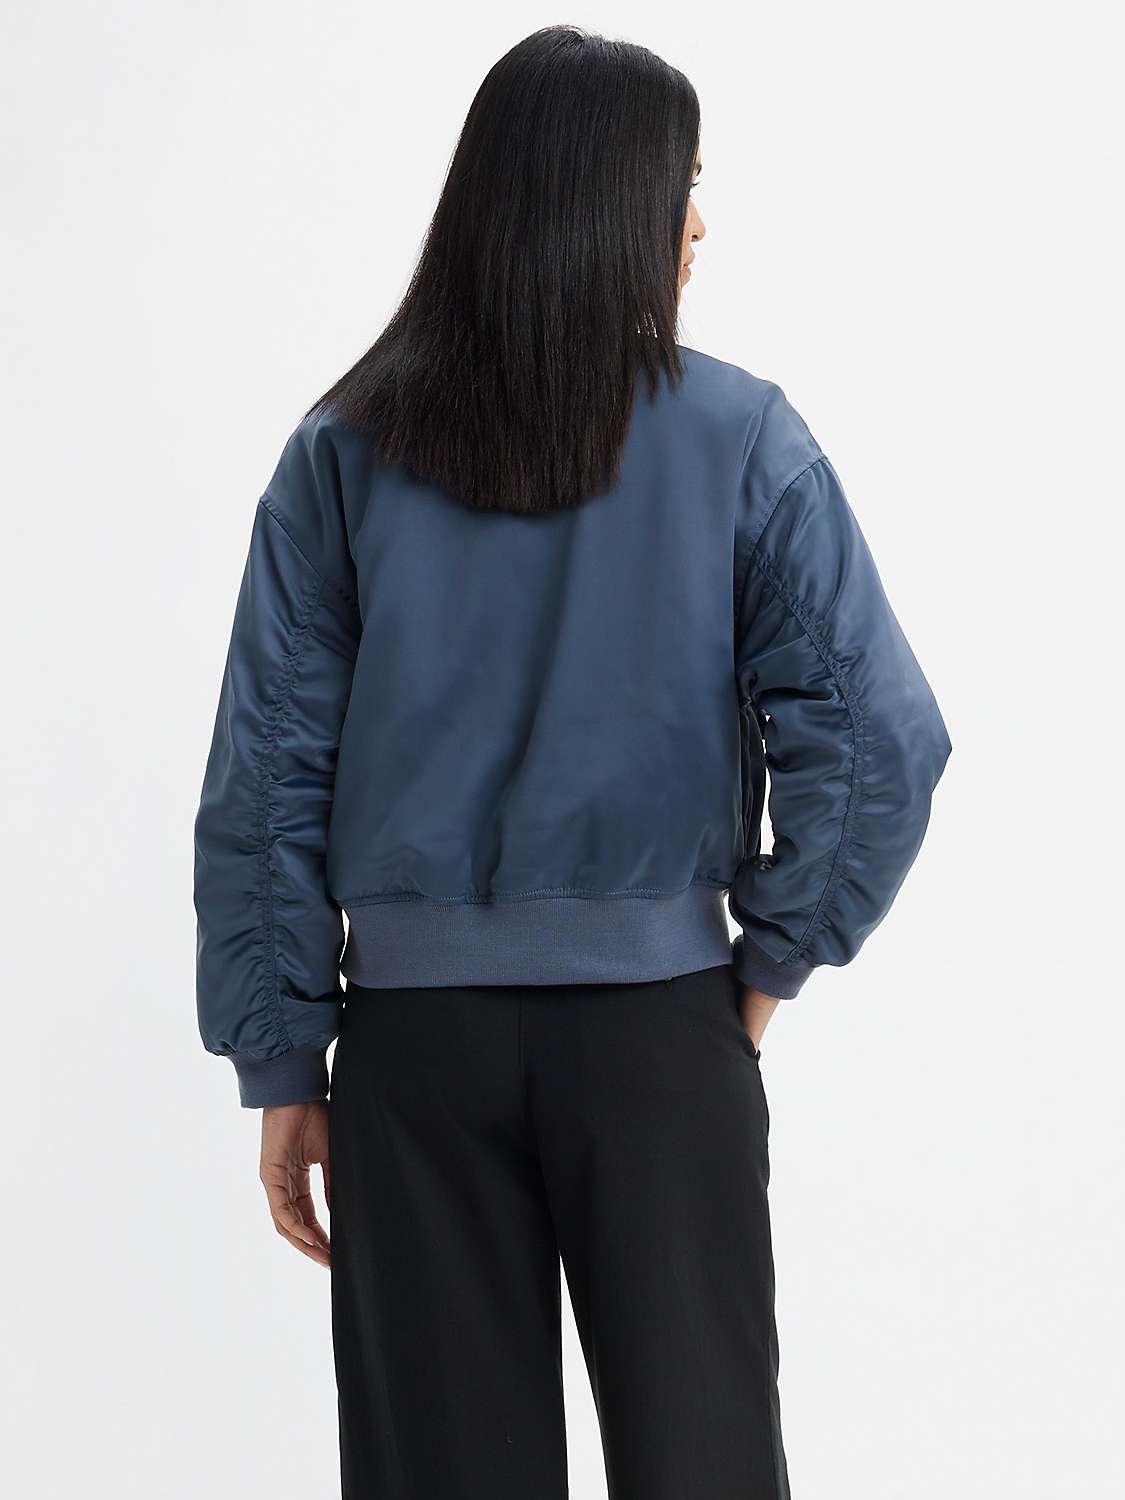 Buy Levi's Andy Tech Bomber Jacket Online at johnlewis.com